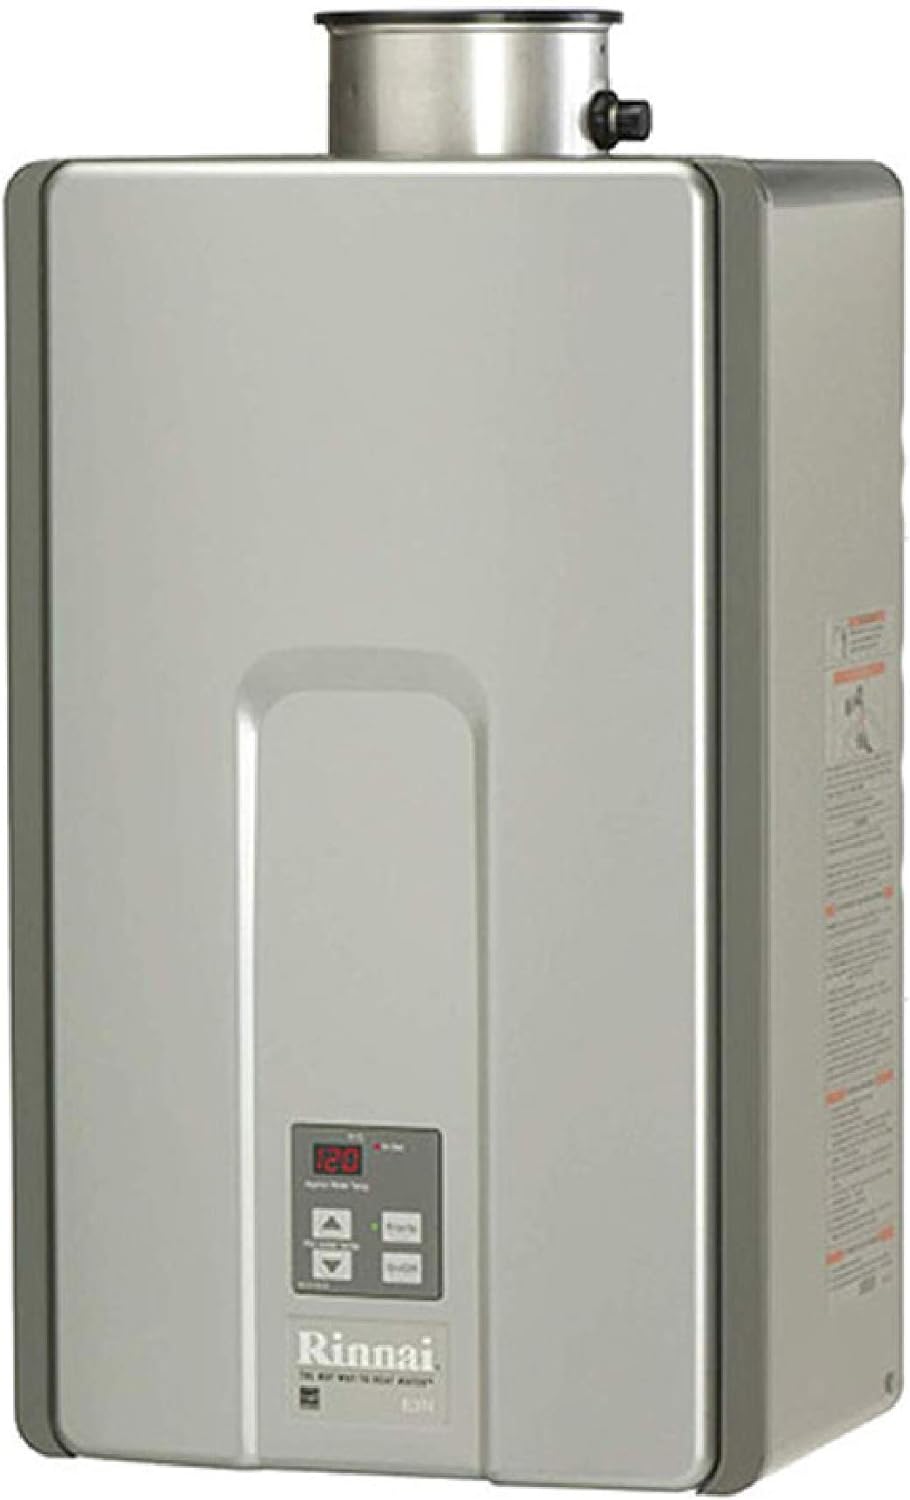 Rinnai RL94IN Tankless Hot Water Heater Review